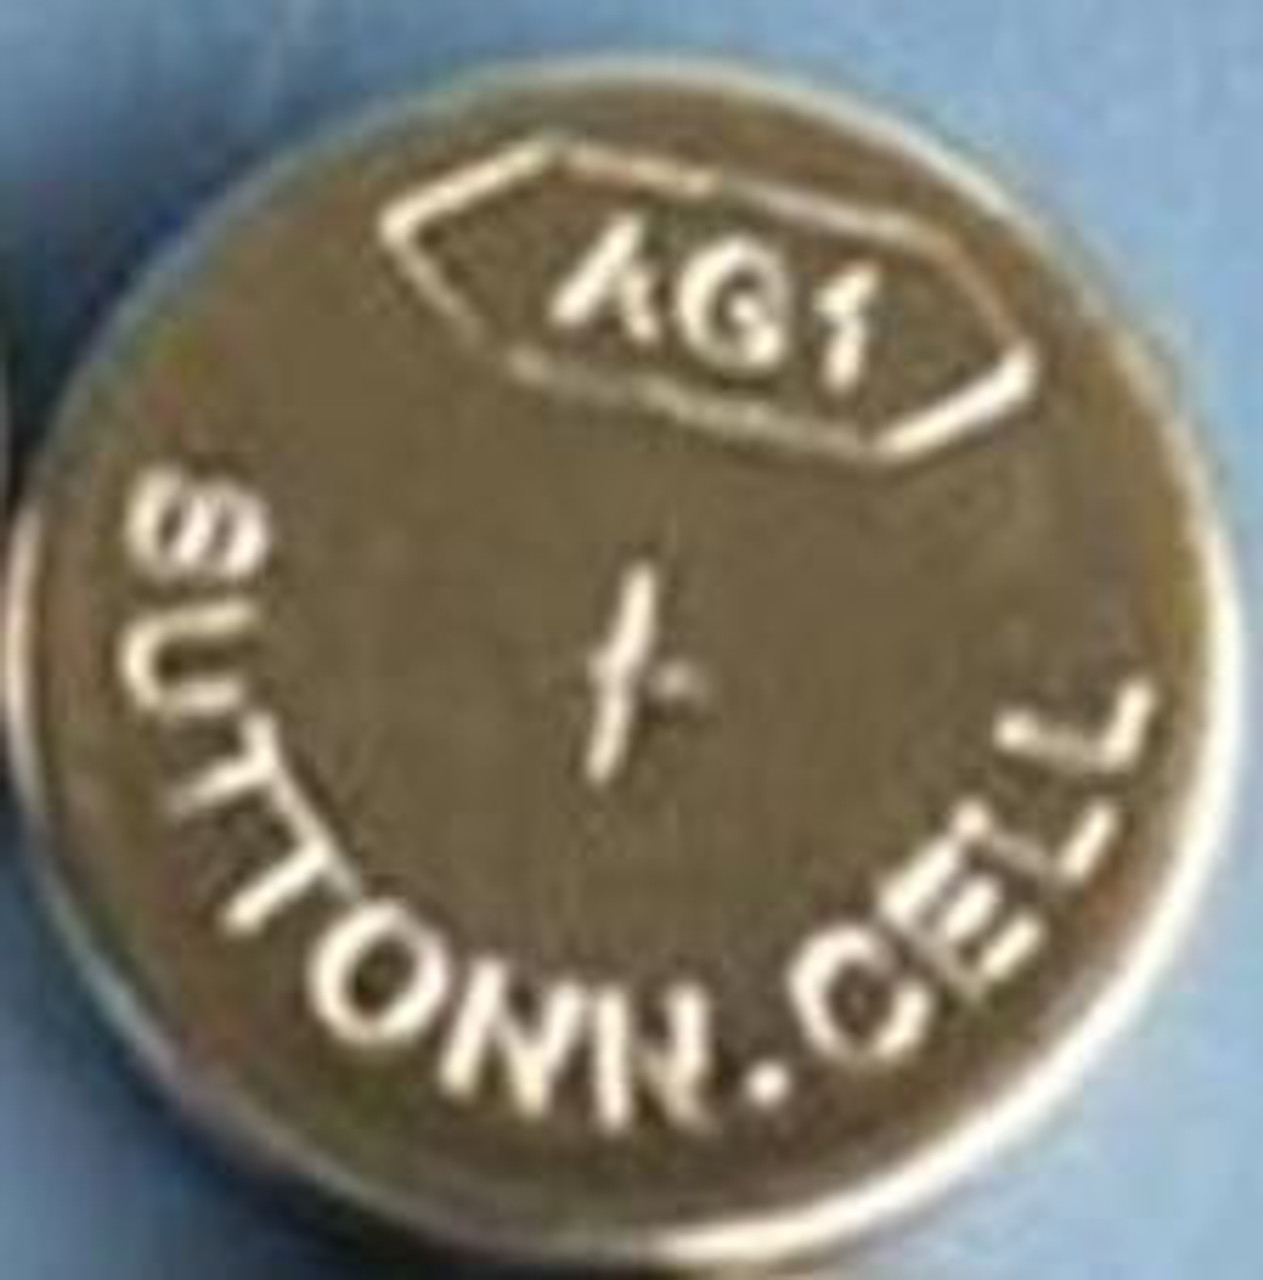 AG1 / LR621 Alkaline Button Watch Battery 1.5V - 50 Pack + FREE SHIPPING! -  Brooklyn Battery Works